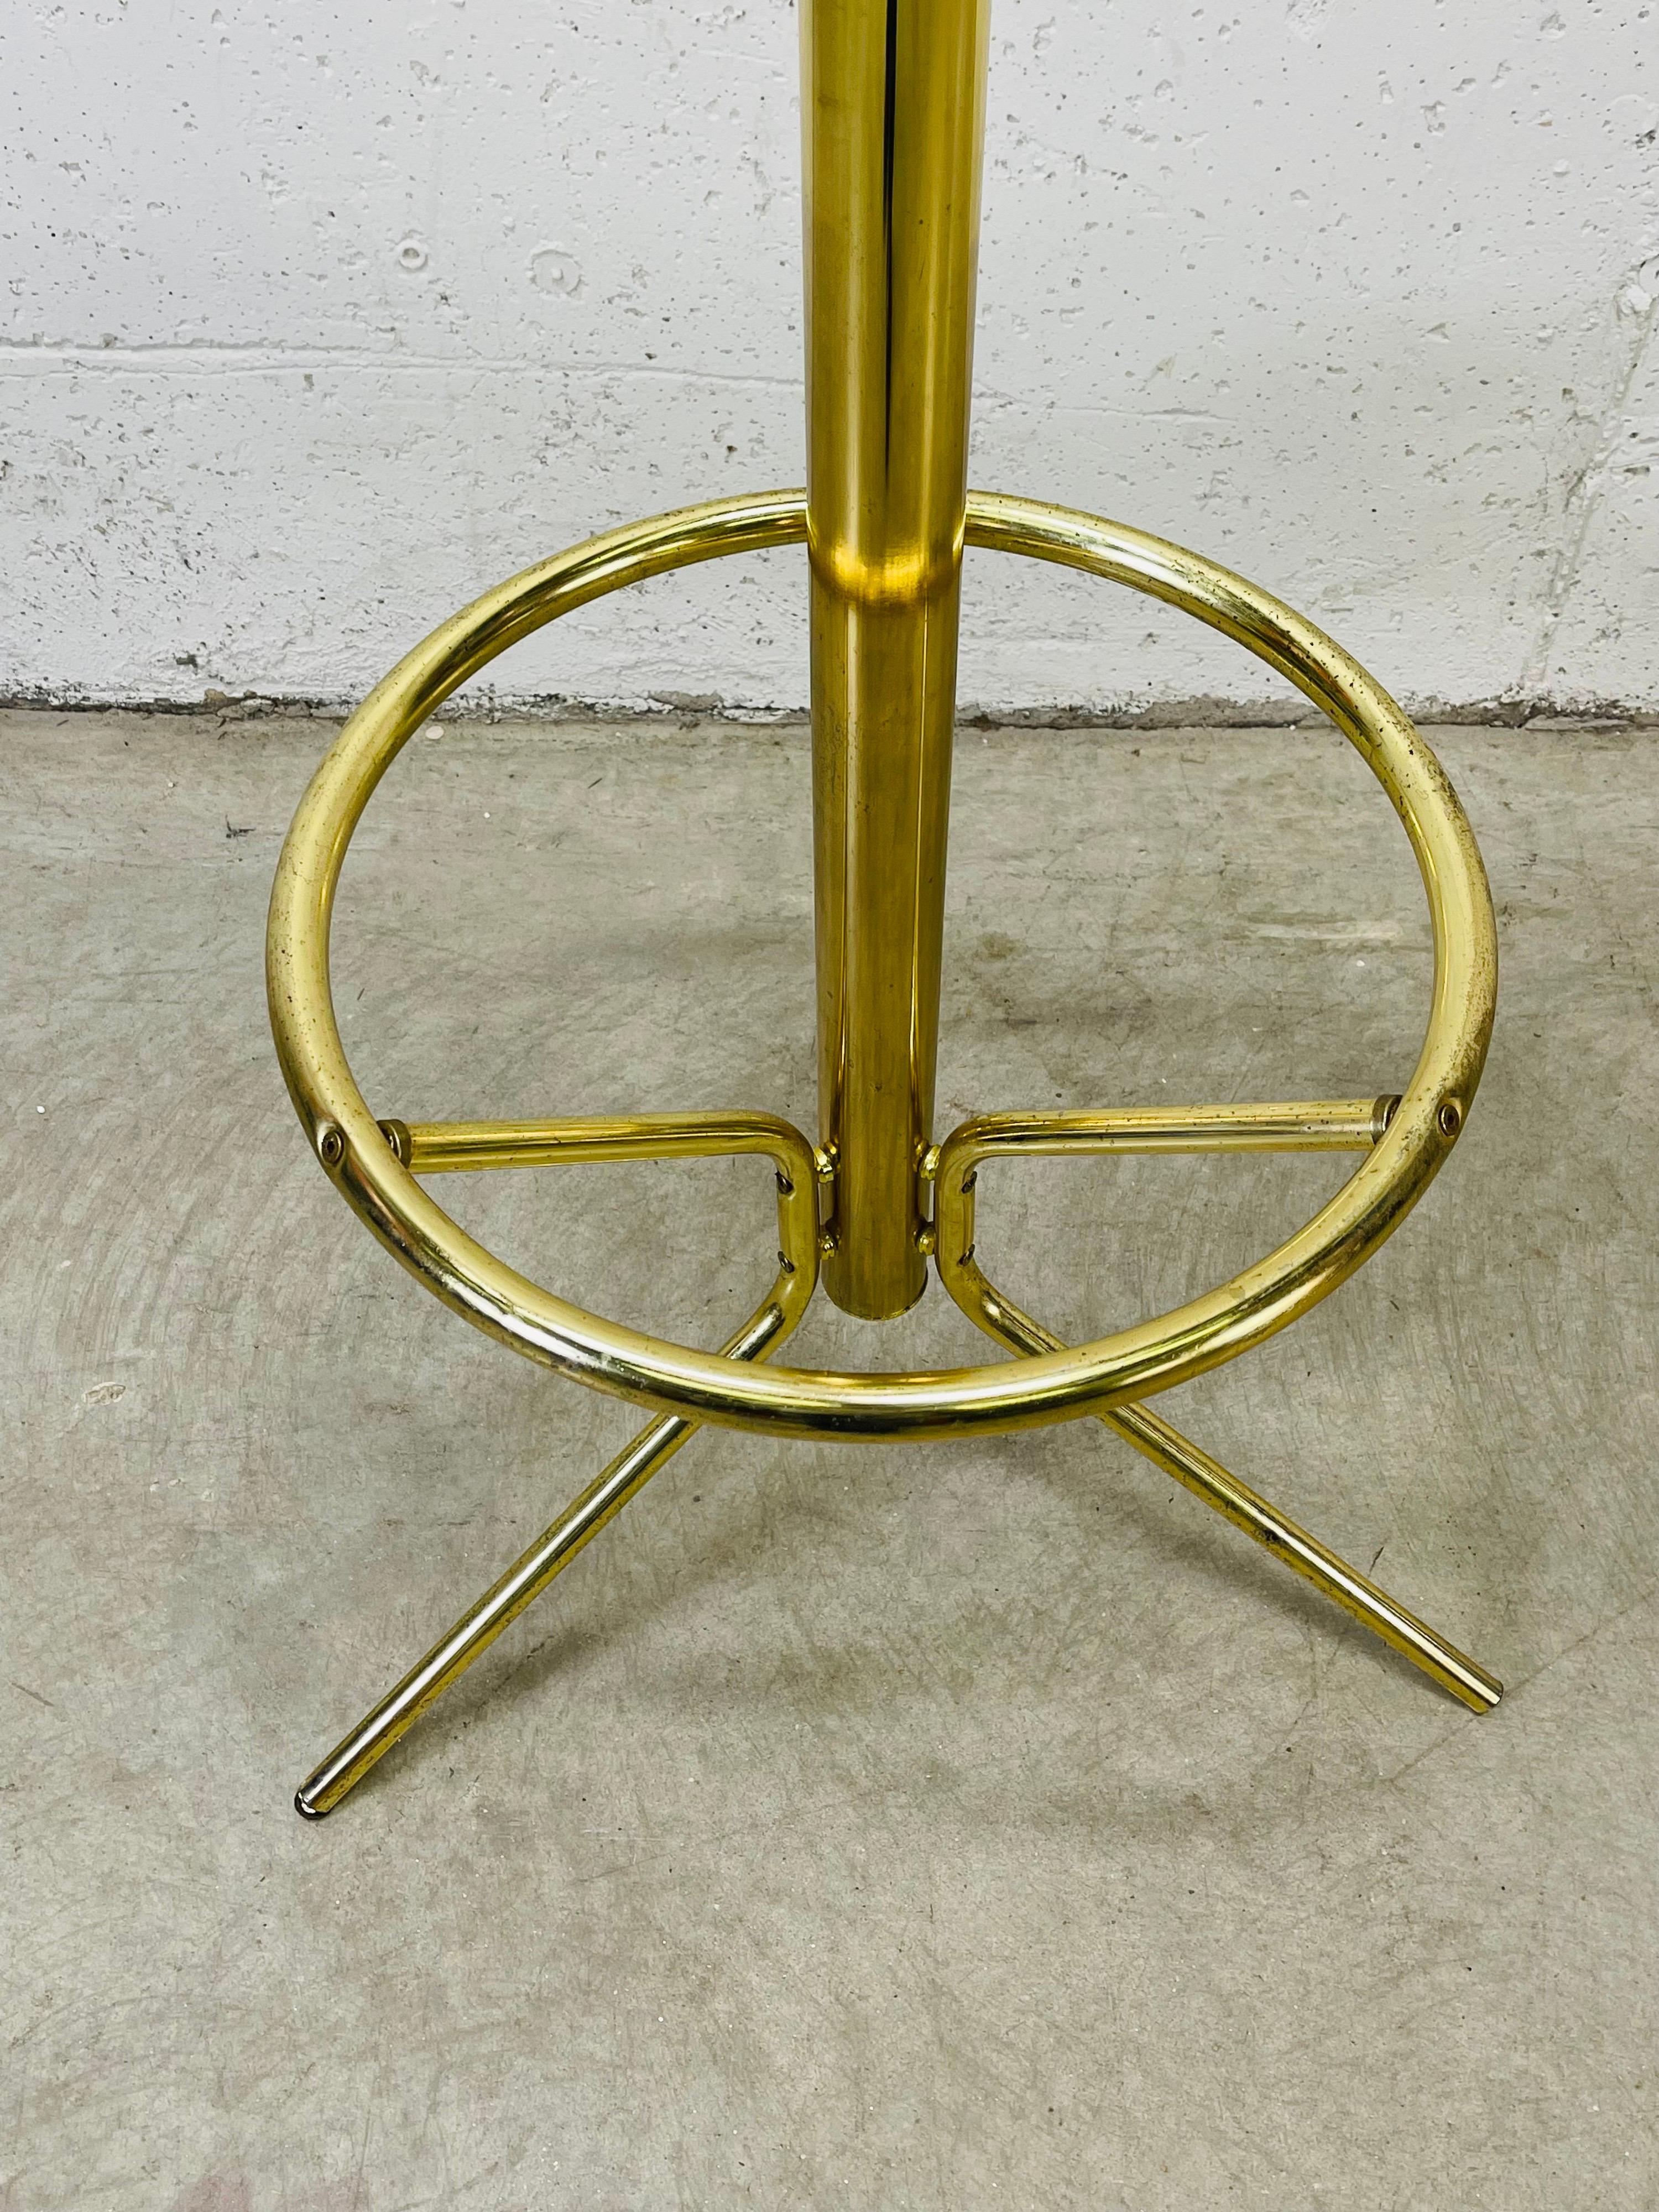 Vintage 1970s tall brass coat and hat rack. The rack has a rounded base and is sturdy. Tarnish from age. No marks.